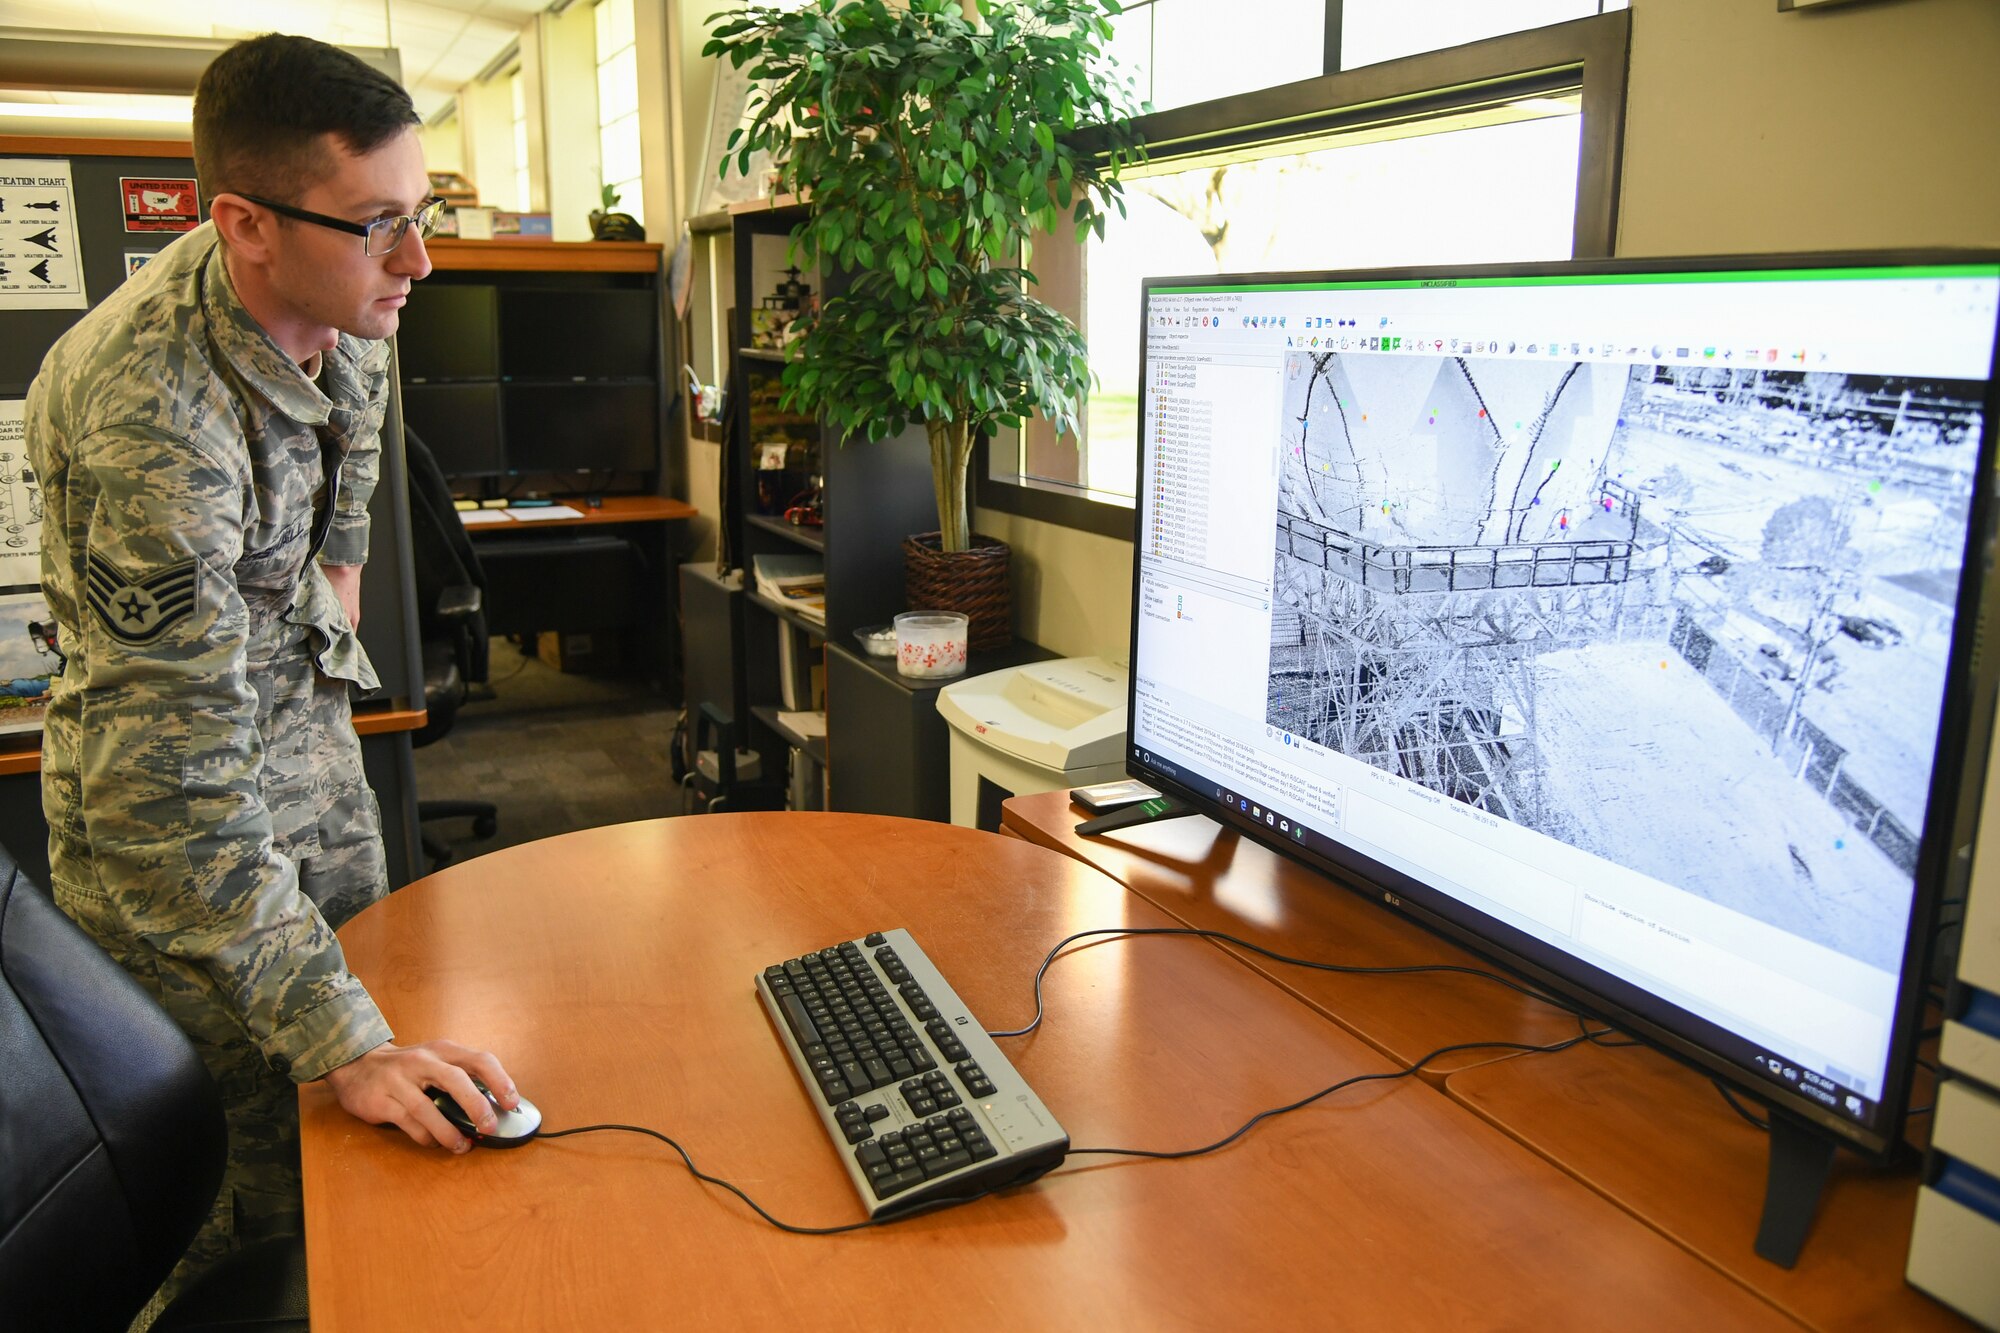 Staff Sgt. Austin Marshall, 84th Radar Evaluation Squadron, shows a scan from a 3-D terrestrial laser scanner April 17, 2019, at Hill Air Force Base, Utah. The survey section of the squadron recently received the new laser that provides faster and more accurate surveys around radar sites. (U.S. Air Force photo by Cynthia Griggs)